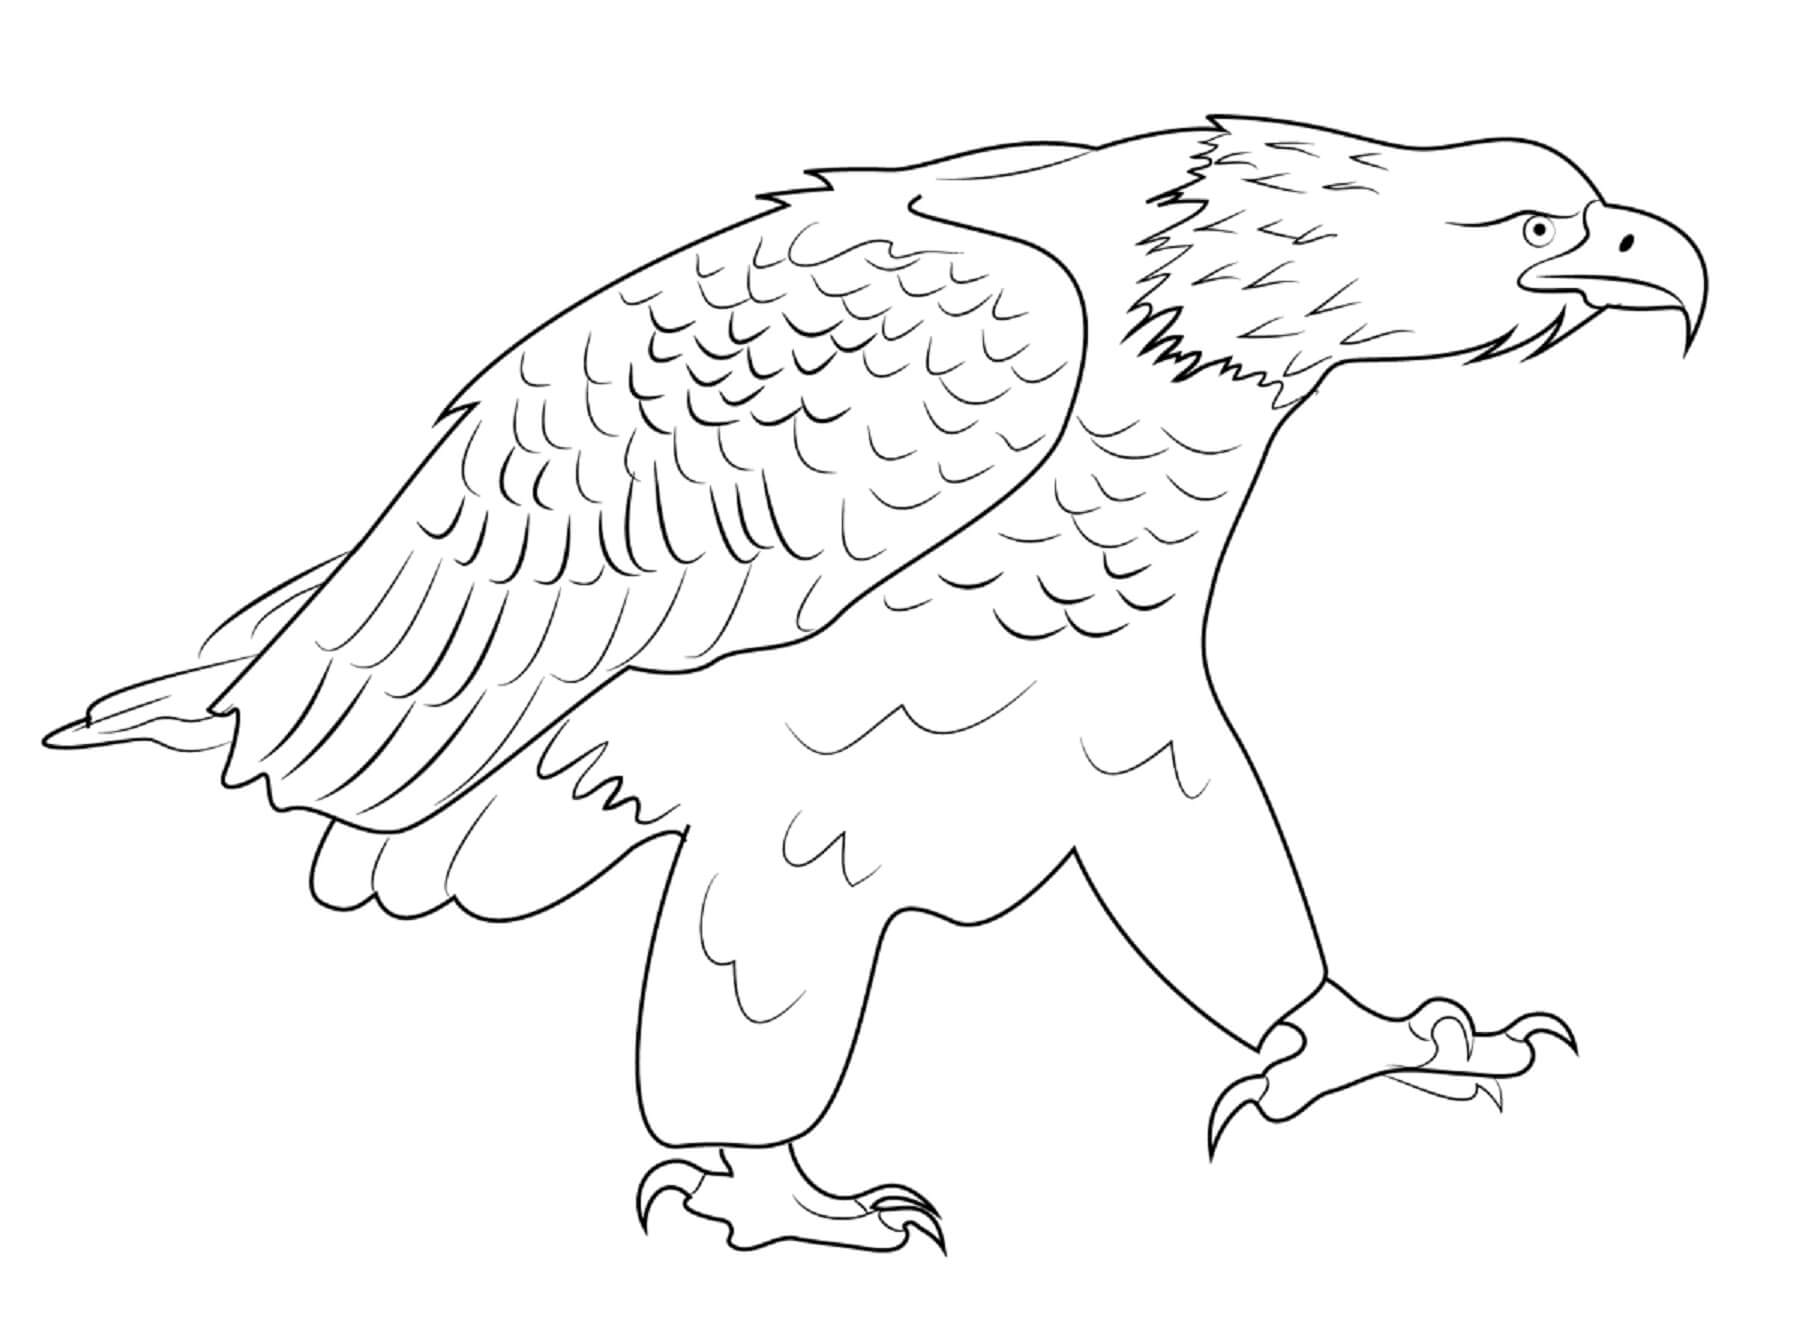 Bald Eagle coloring page - Download, Print or Color Online for Free